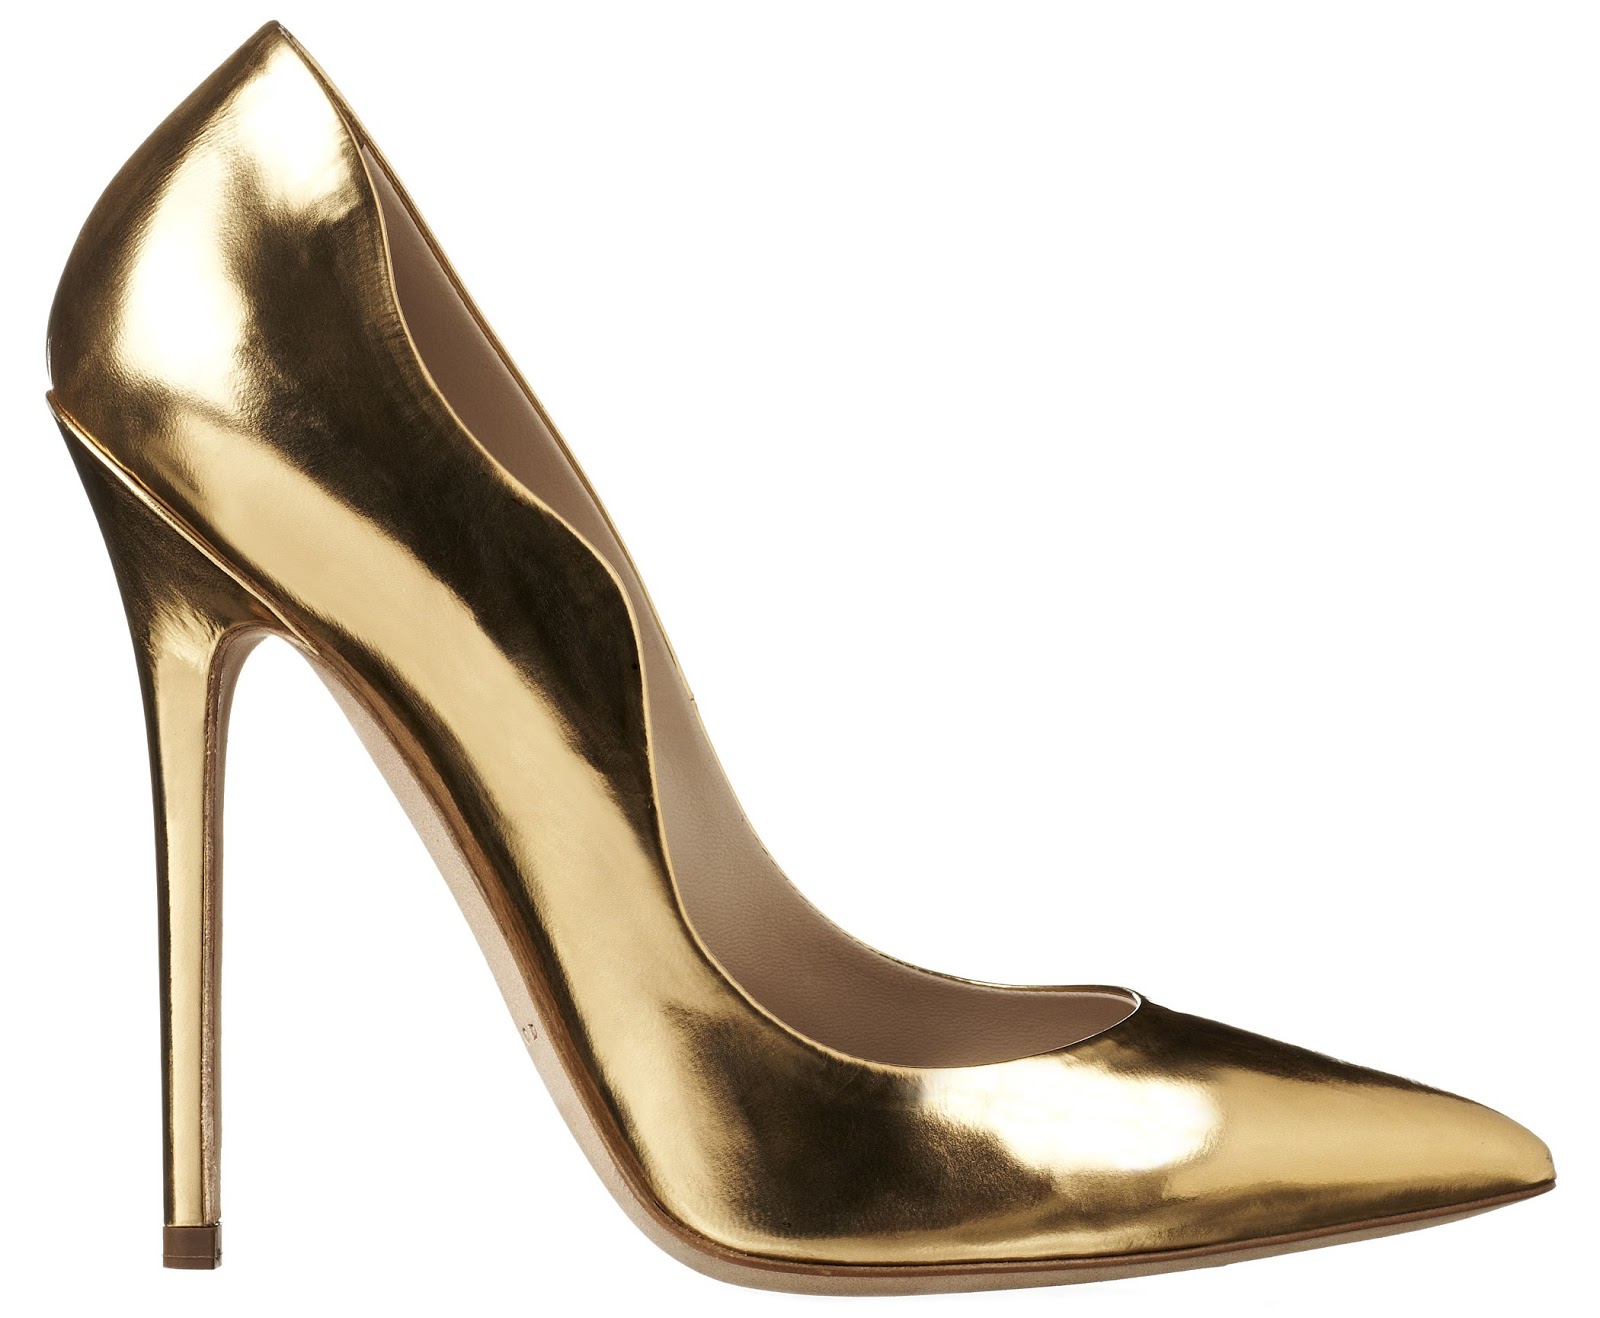 Shoe Luv : The Daily Heel: The Brian Atwood Besame Pump in Gold Leather